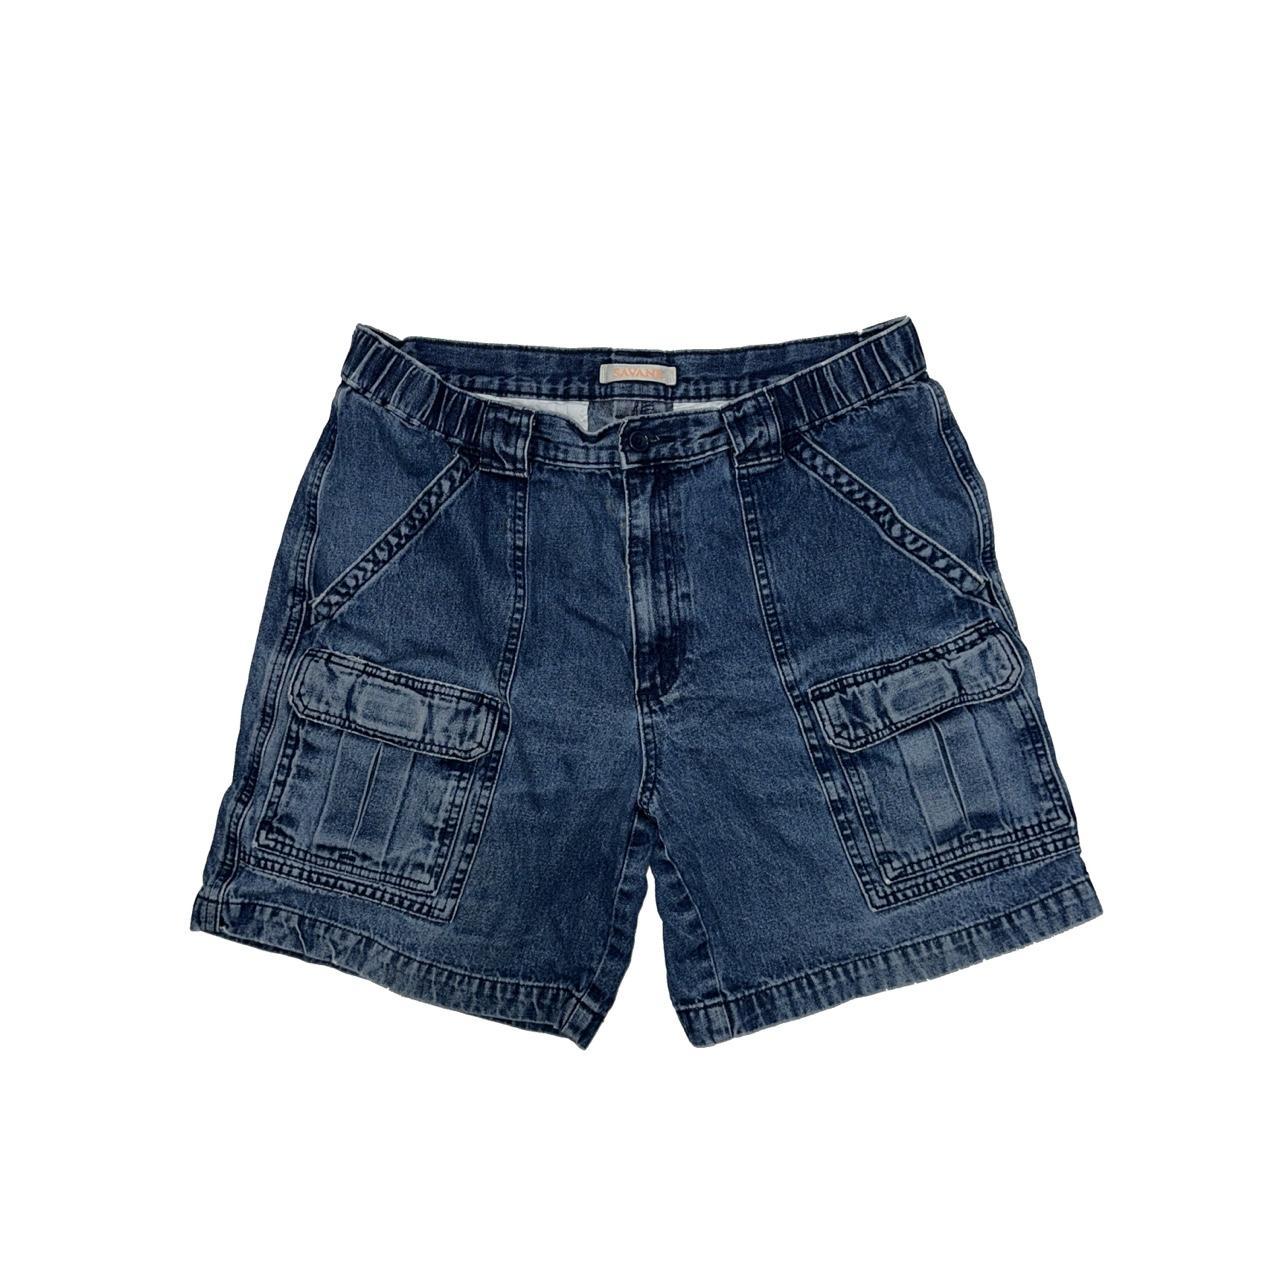 These #jorts are the perfect #denim #shorts for any... - Depop